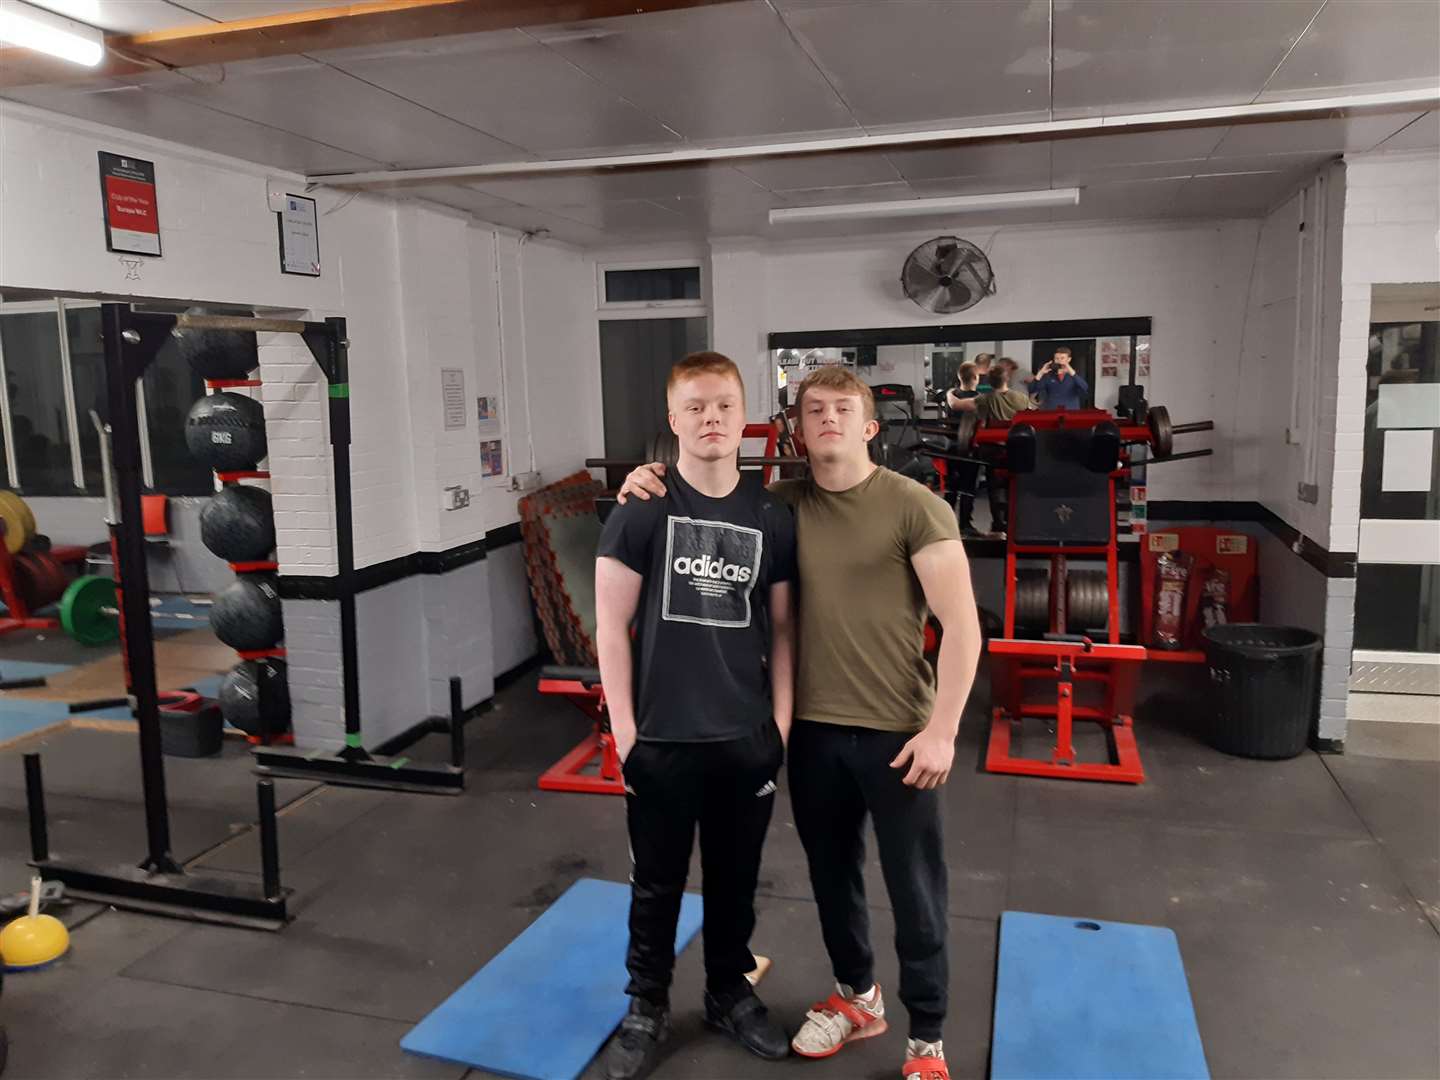 Locals Len, 17, and Mack, 16, enjoy coming to the gym to train and are now entering competitions